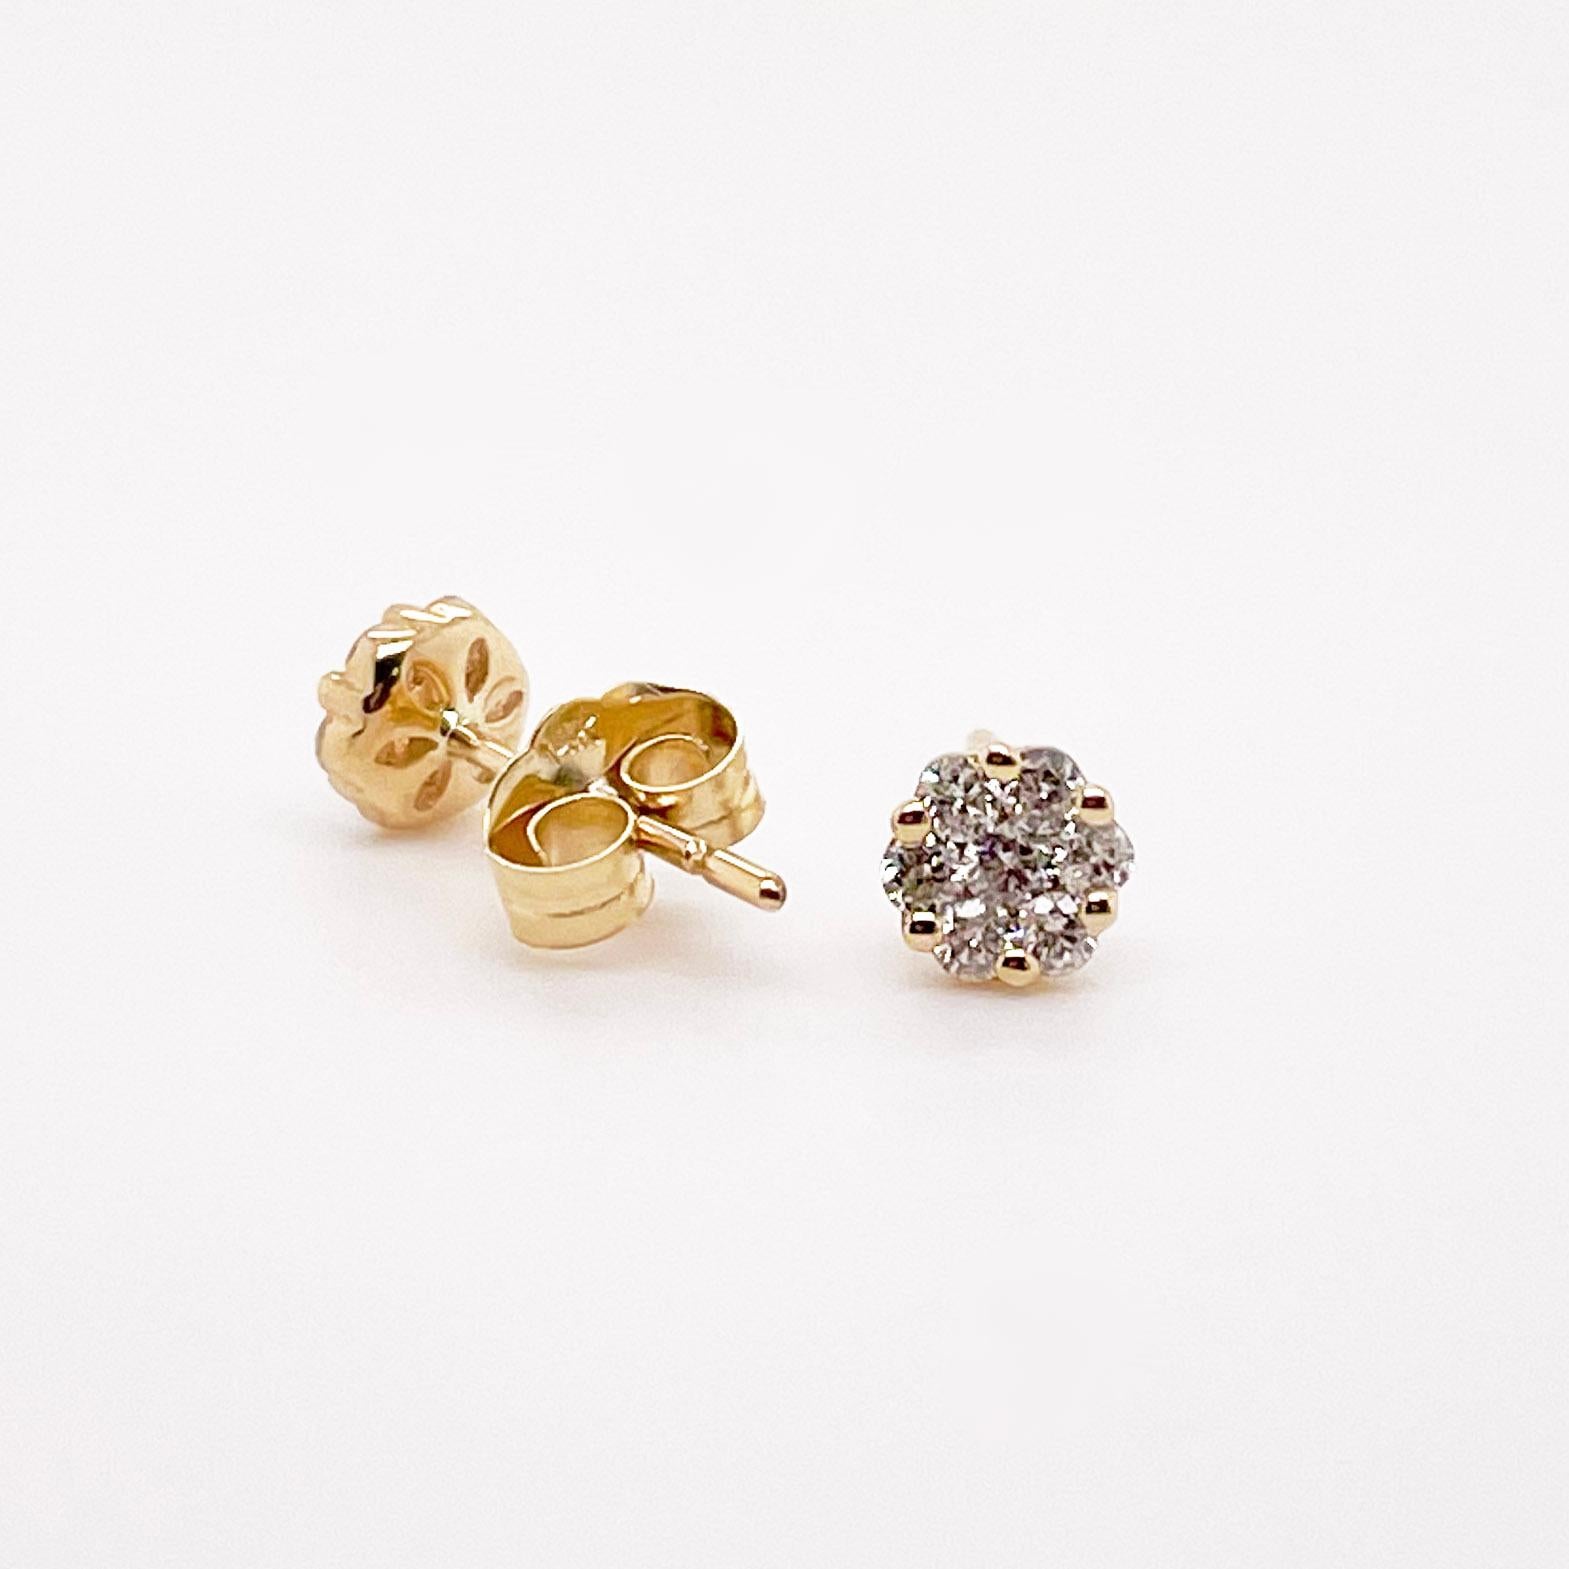 Contemporary Diamond Cluster Stud Earrings, Yellow Gold, Floral Design